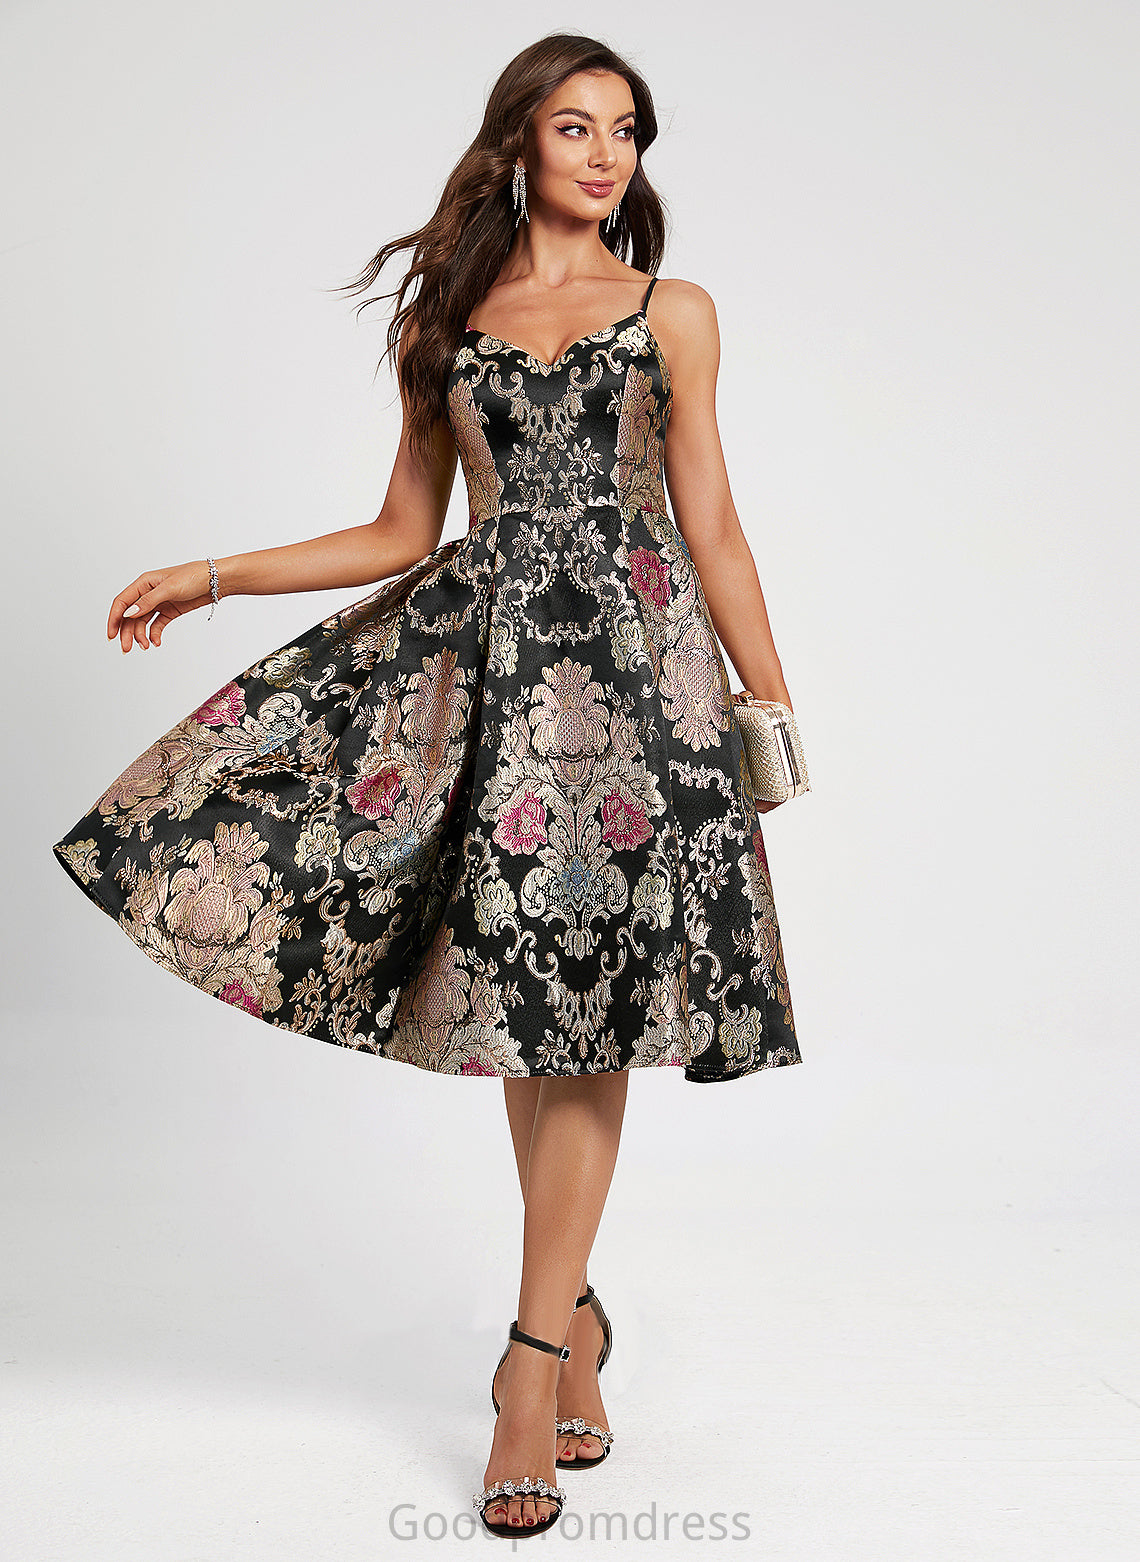 A-Line Homecoming Dresses Bridget Knee-Length V-neck Dress Lace Flower(s) Homecoming With